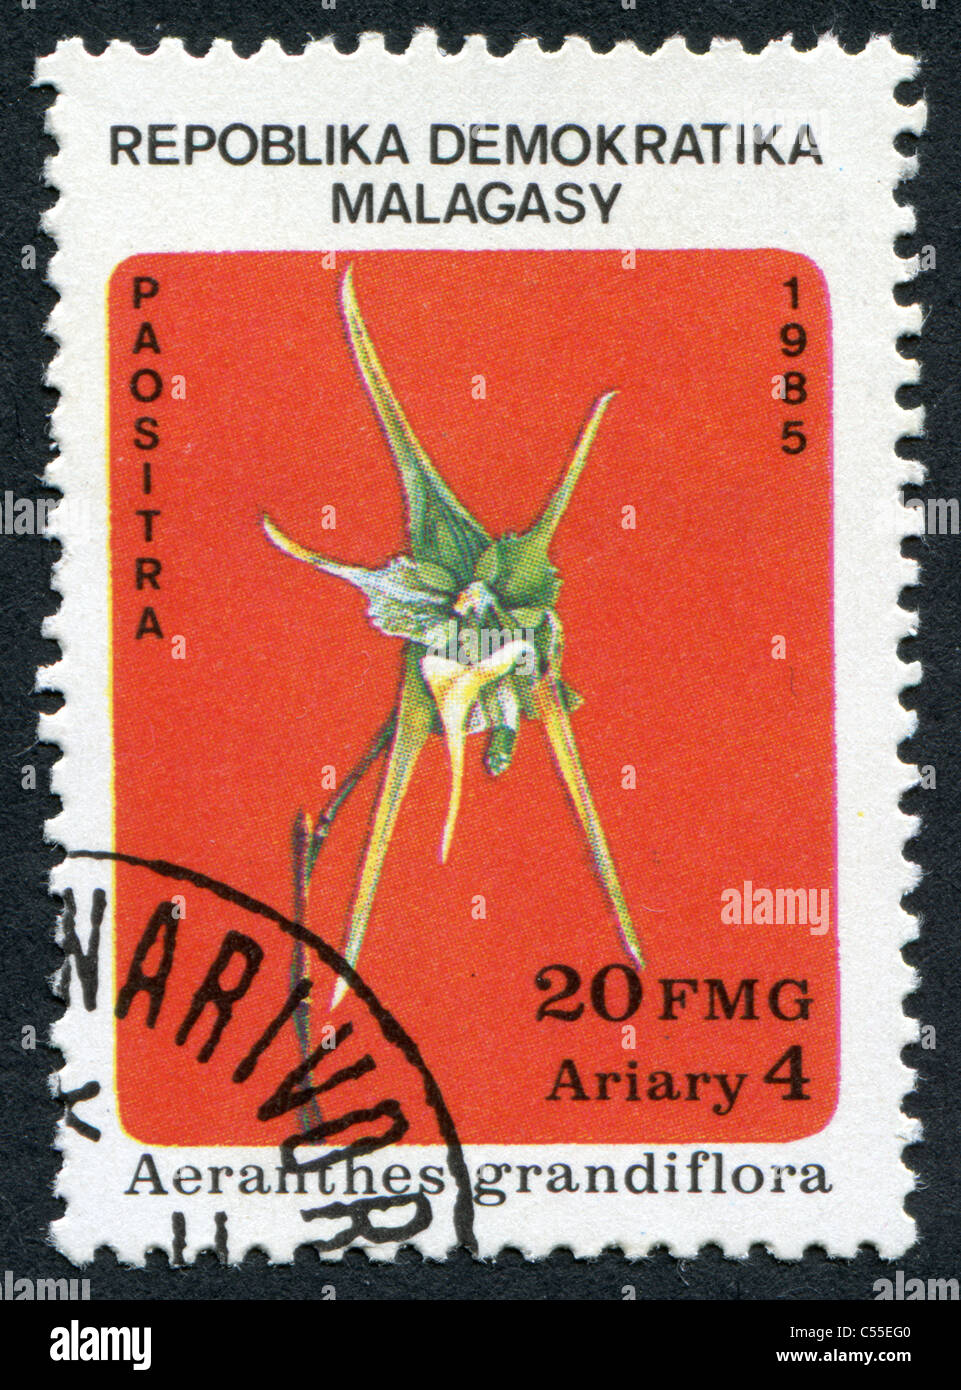 MALAGASY REPUBLIC - 1985: Postage stamps printed in Malagasy, shows a tropical flower Aeranthes grandiflora Stock Photo